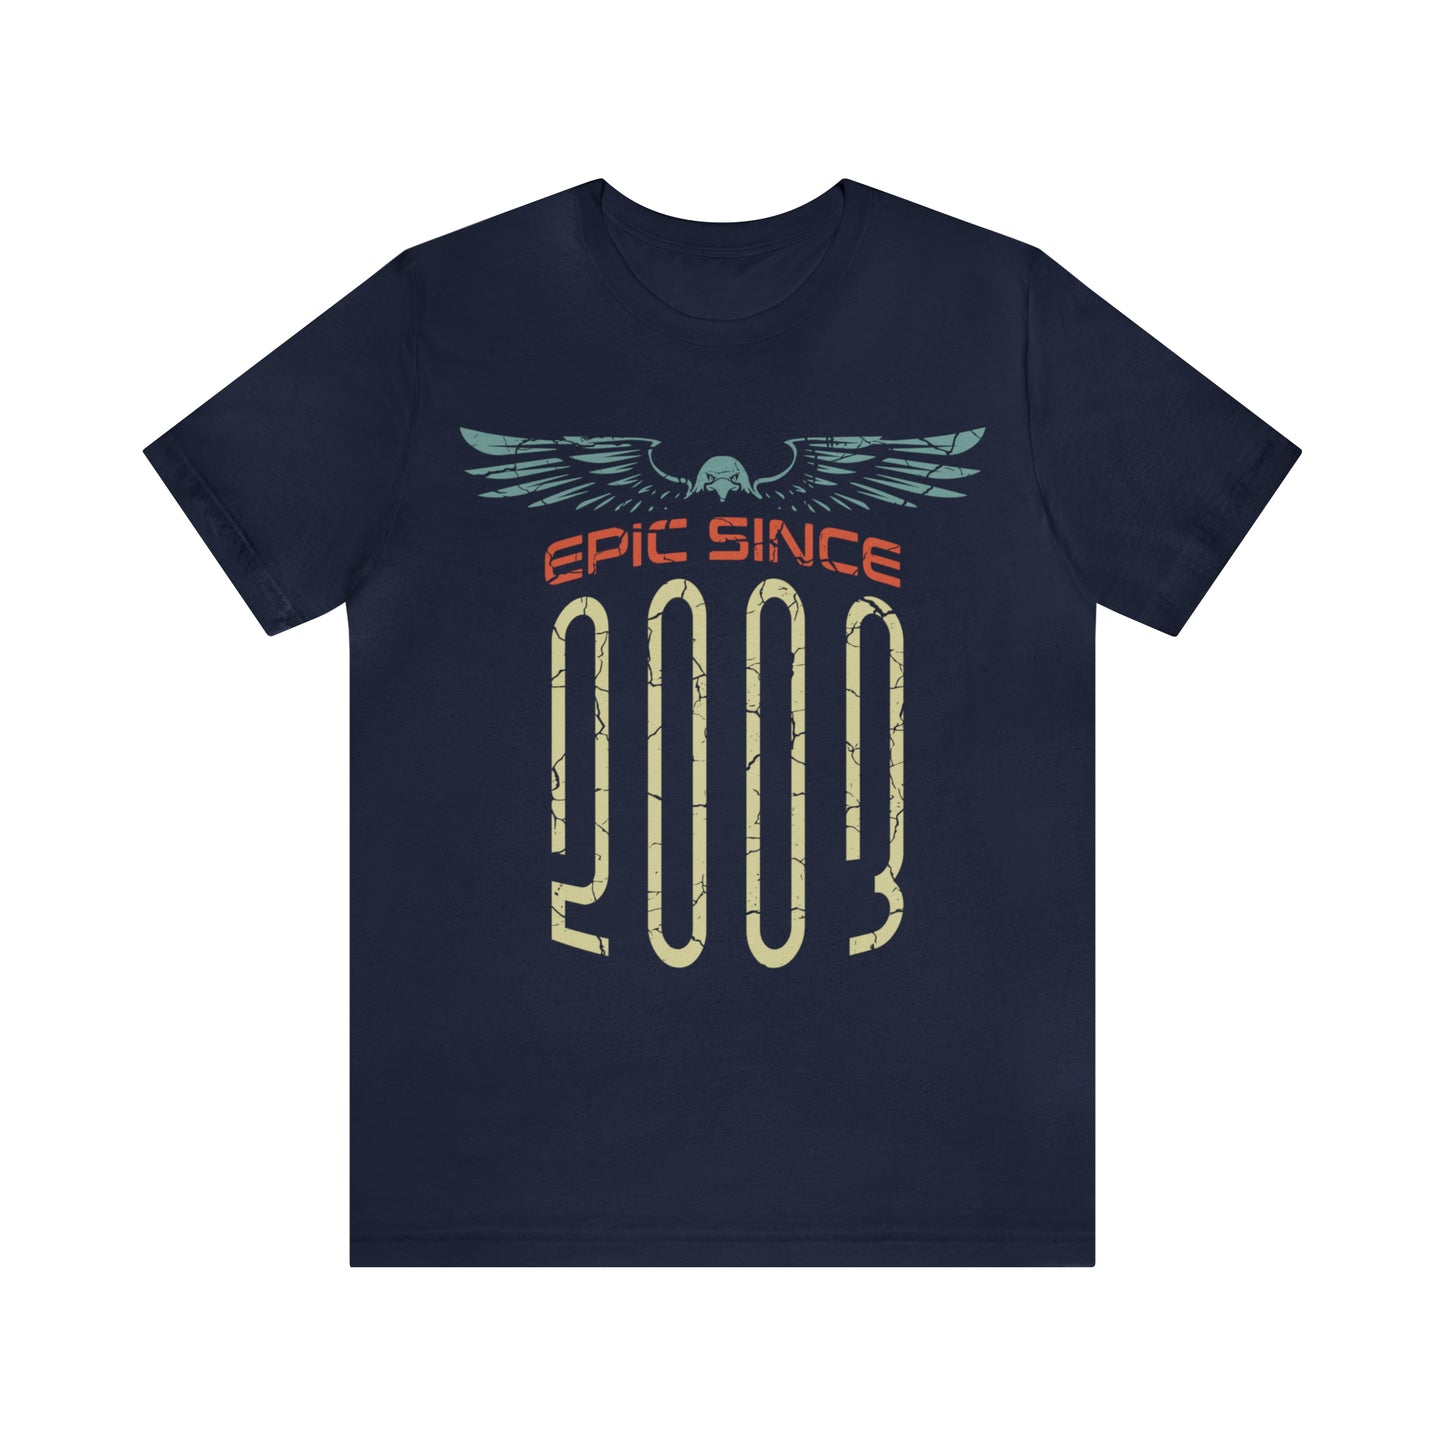 Epic Since 2003 Birthday Shirt for son or nephew,  gift shirt for boy or stepson